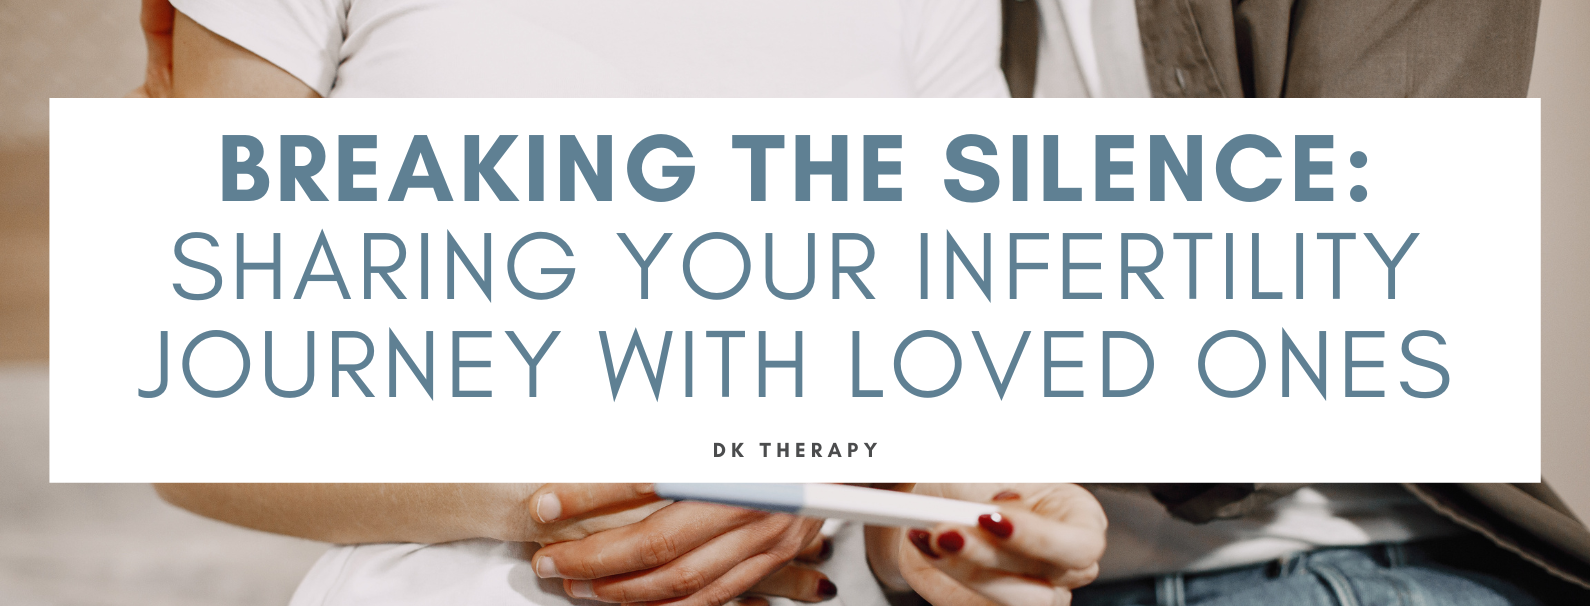 Breaking the Silence Sharing Your Infertility Journey with Loved Ones